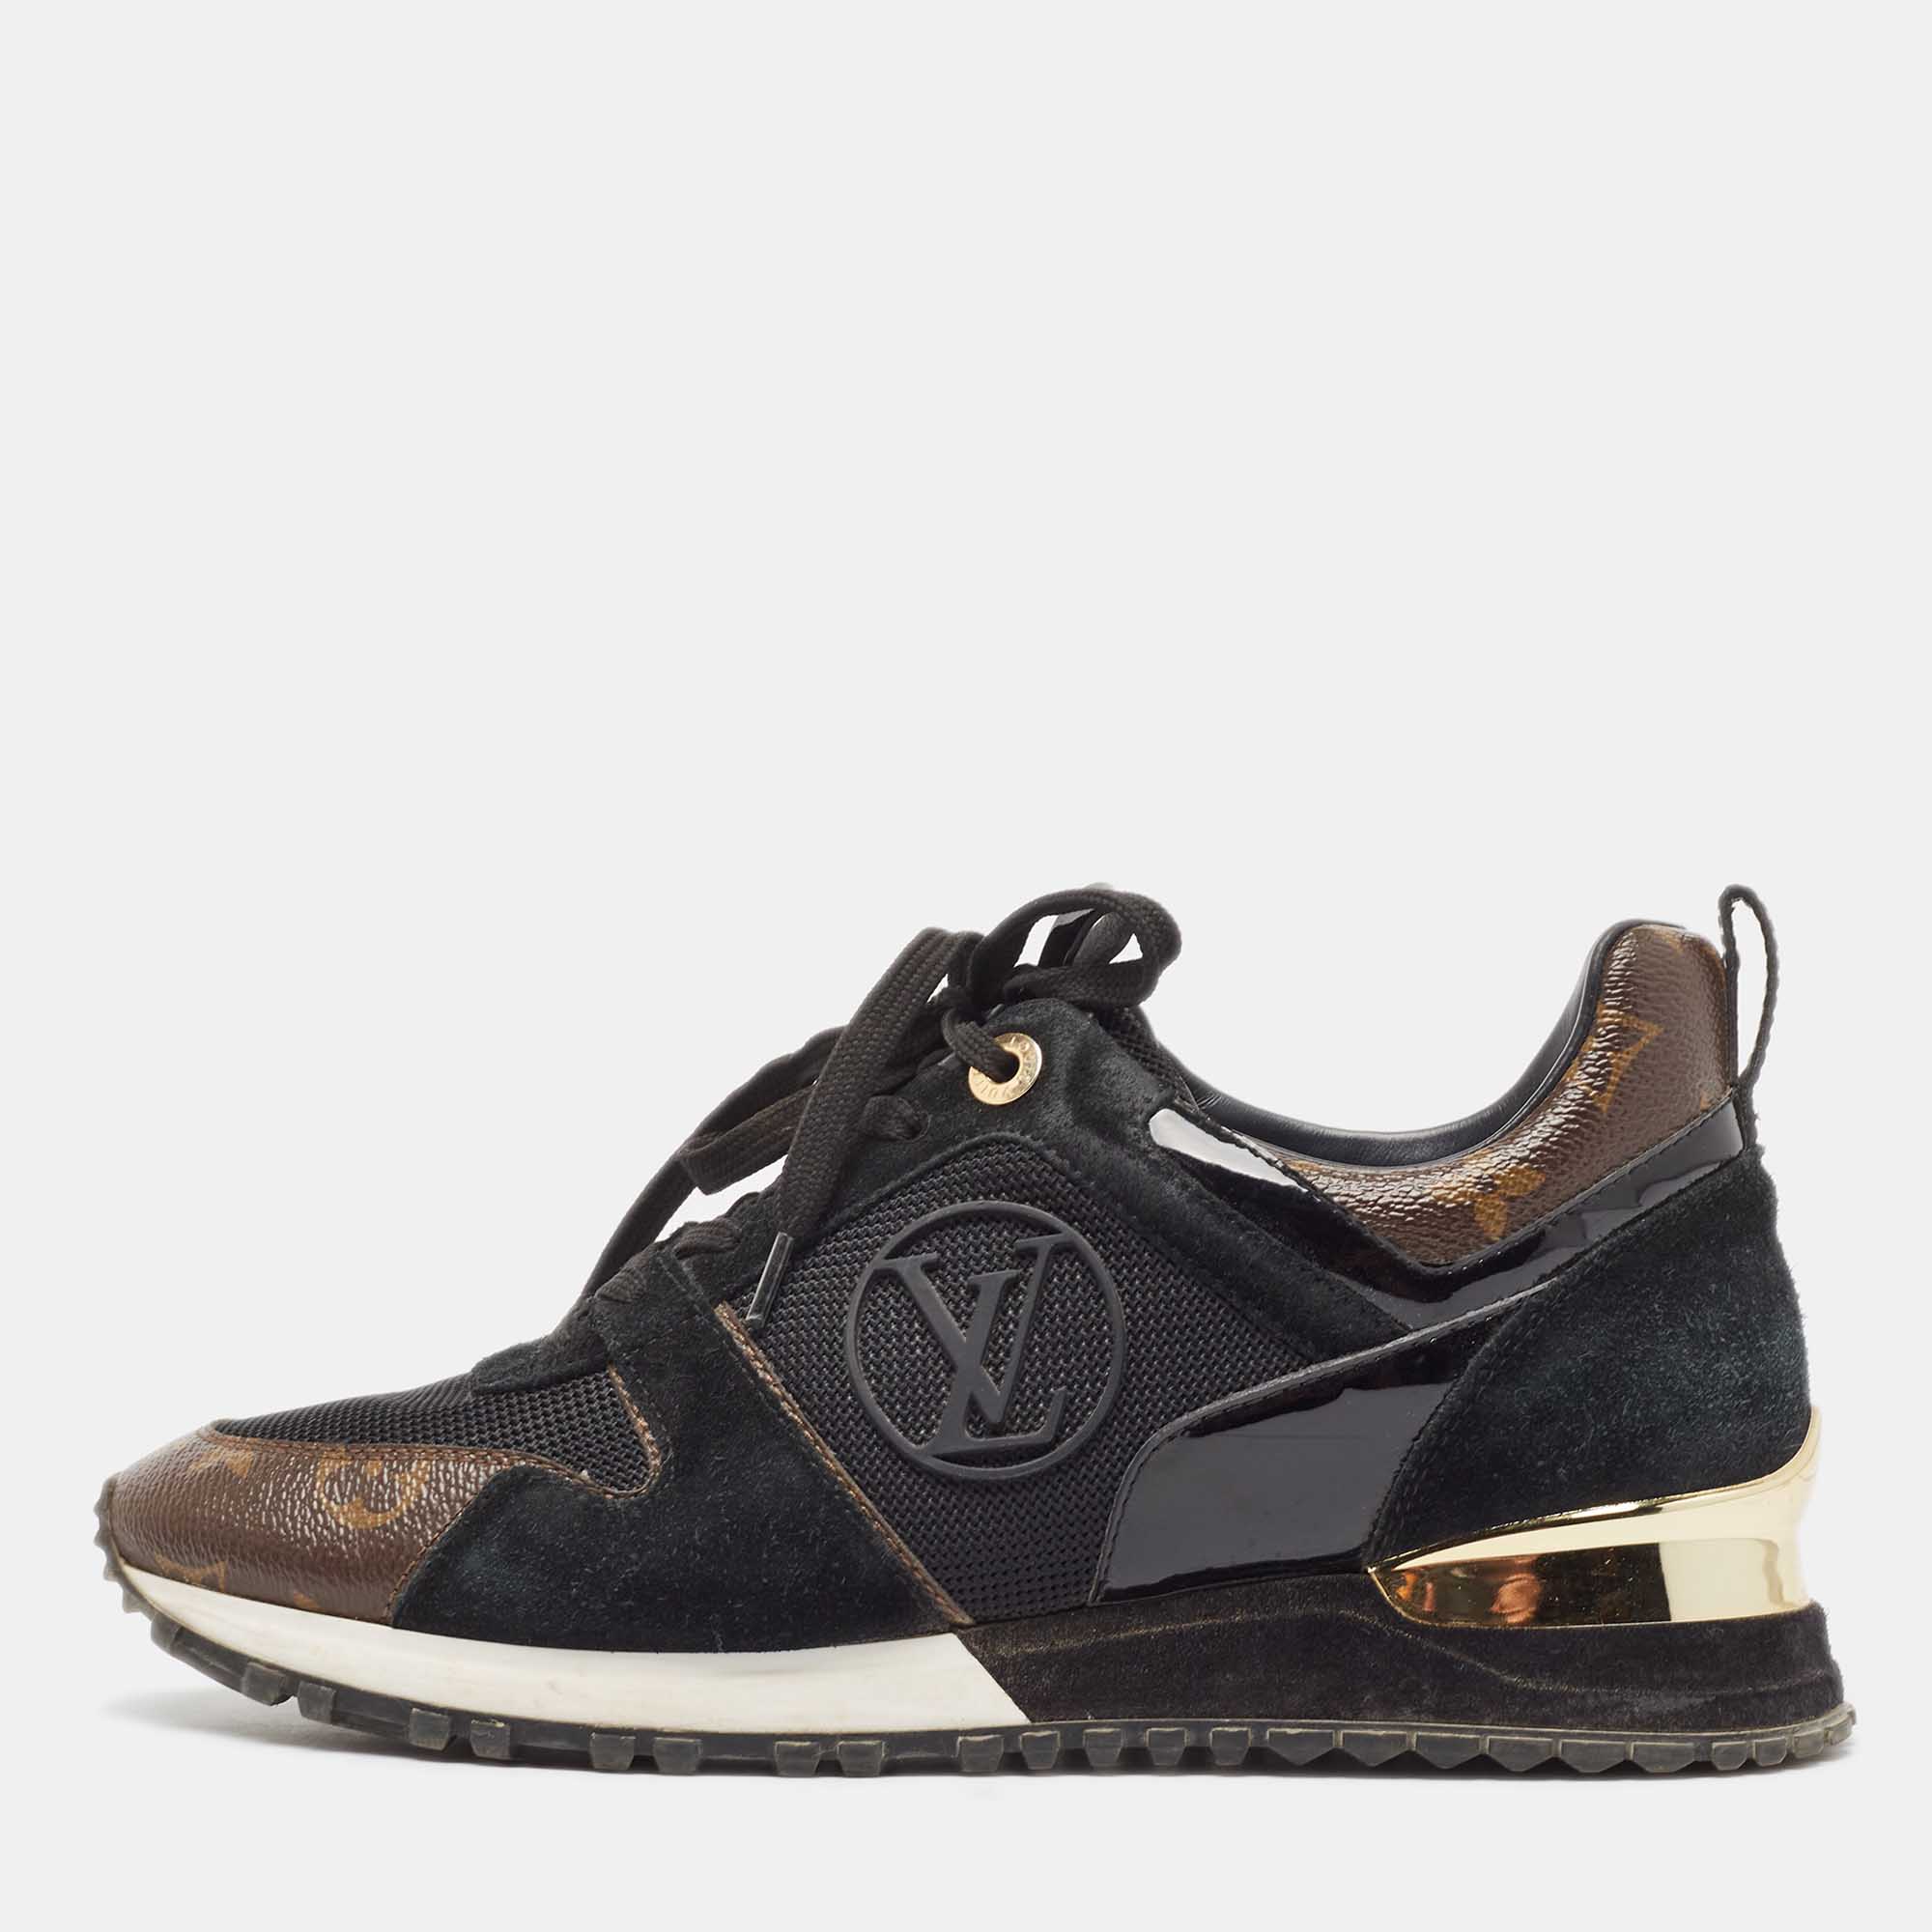 Louis vuitton brown/black monogram coated canvas and mesh run away low top sneakers size 39